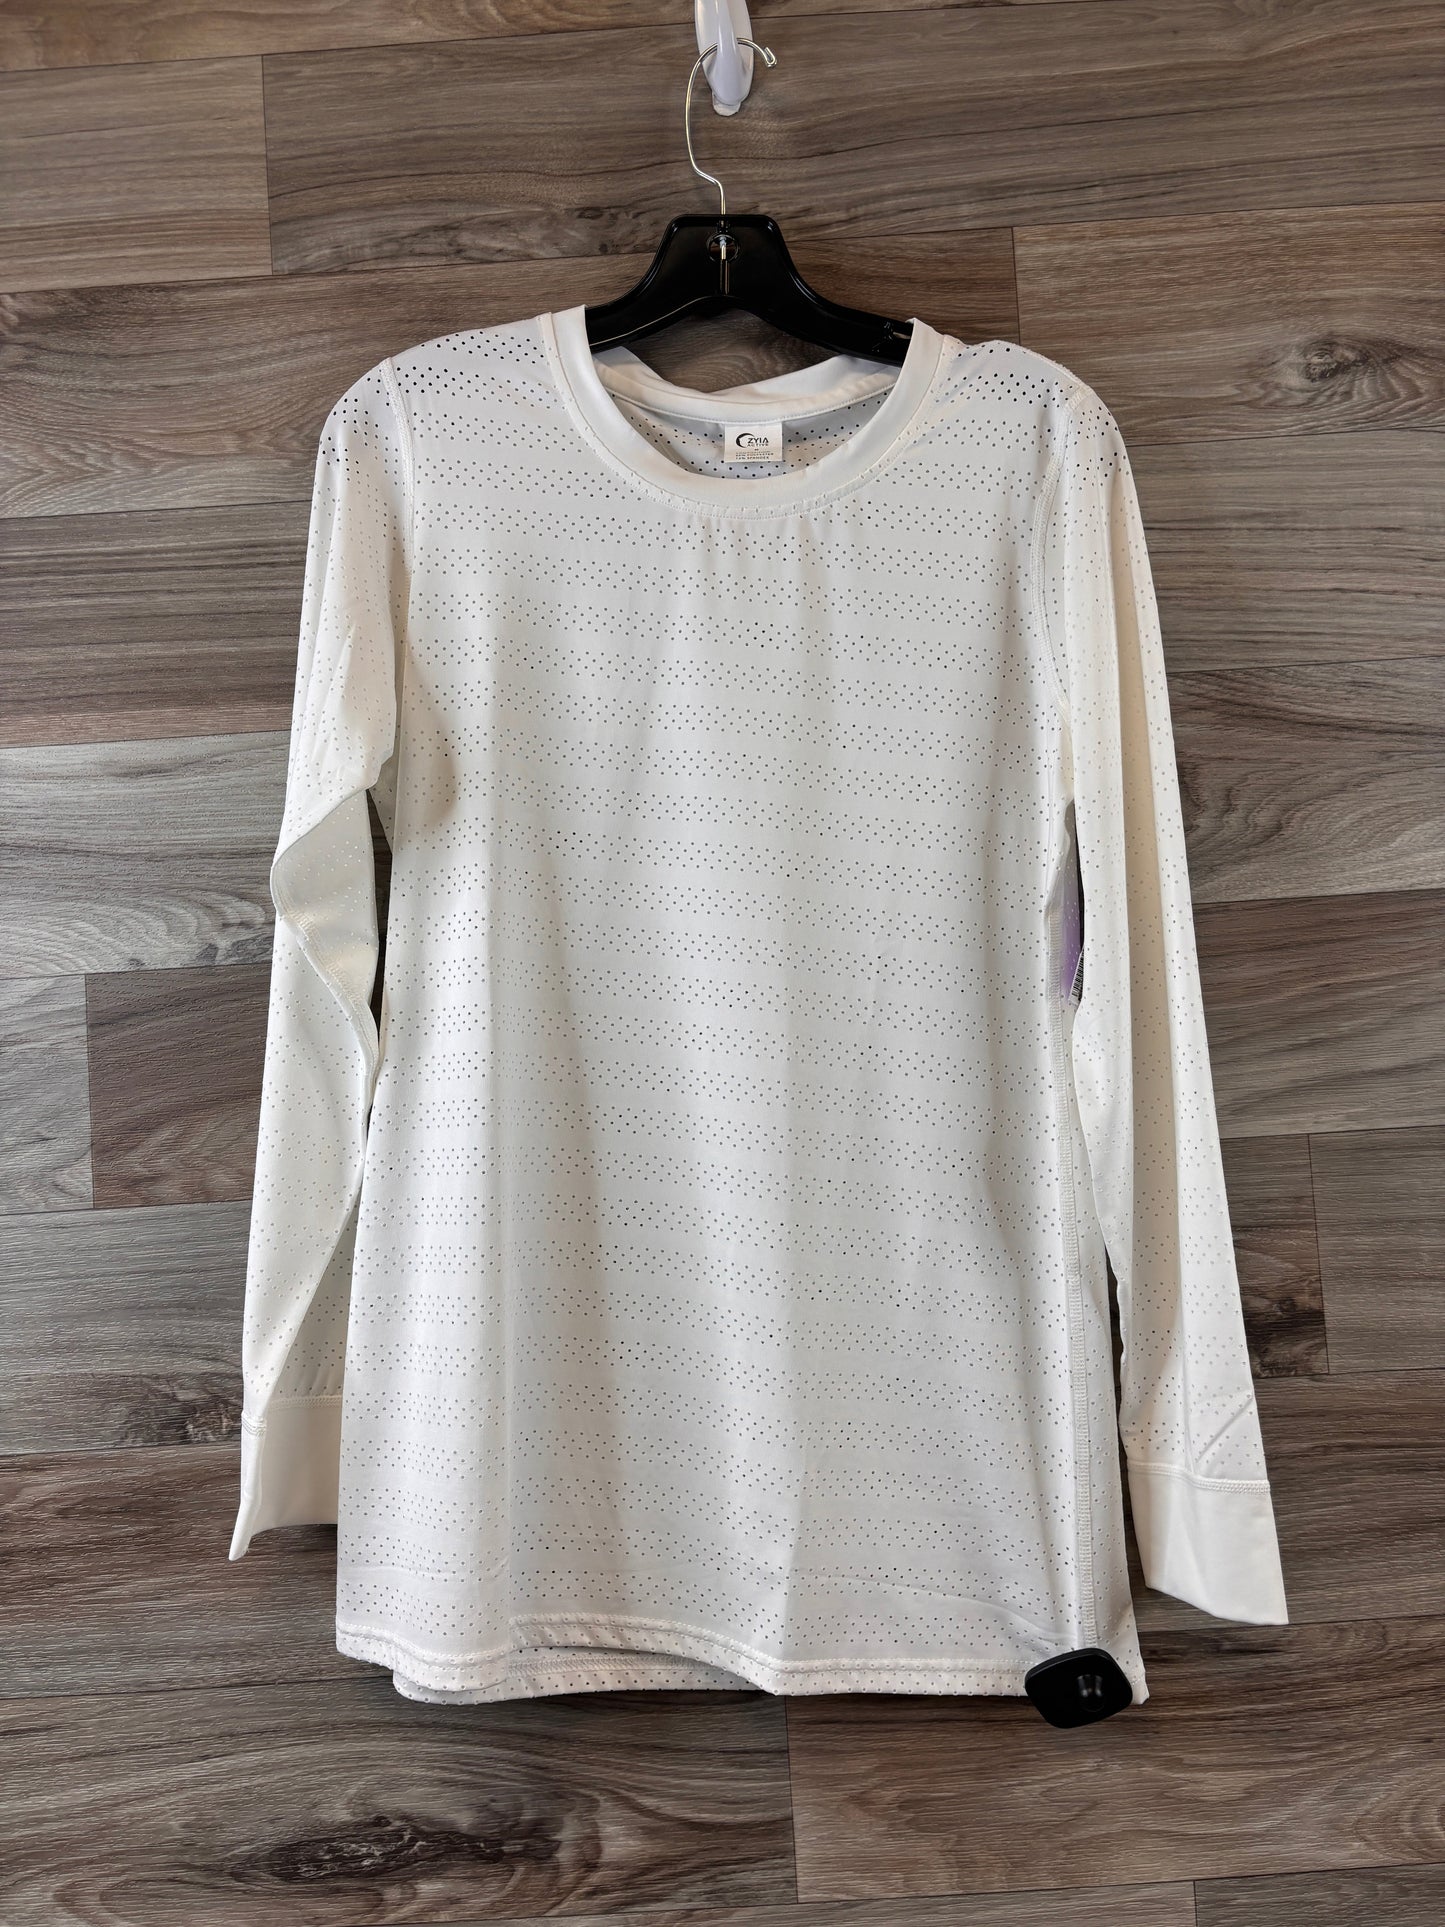 White Athletic Top Long Sleeve Crewneck Zyia, Size M